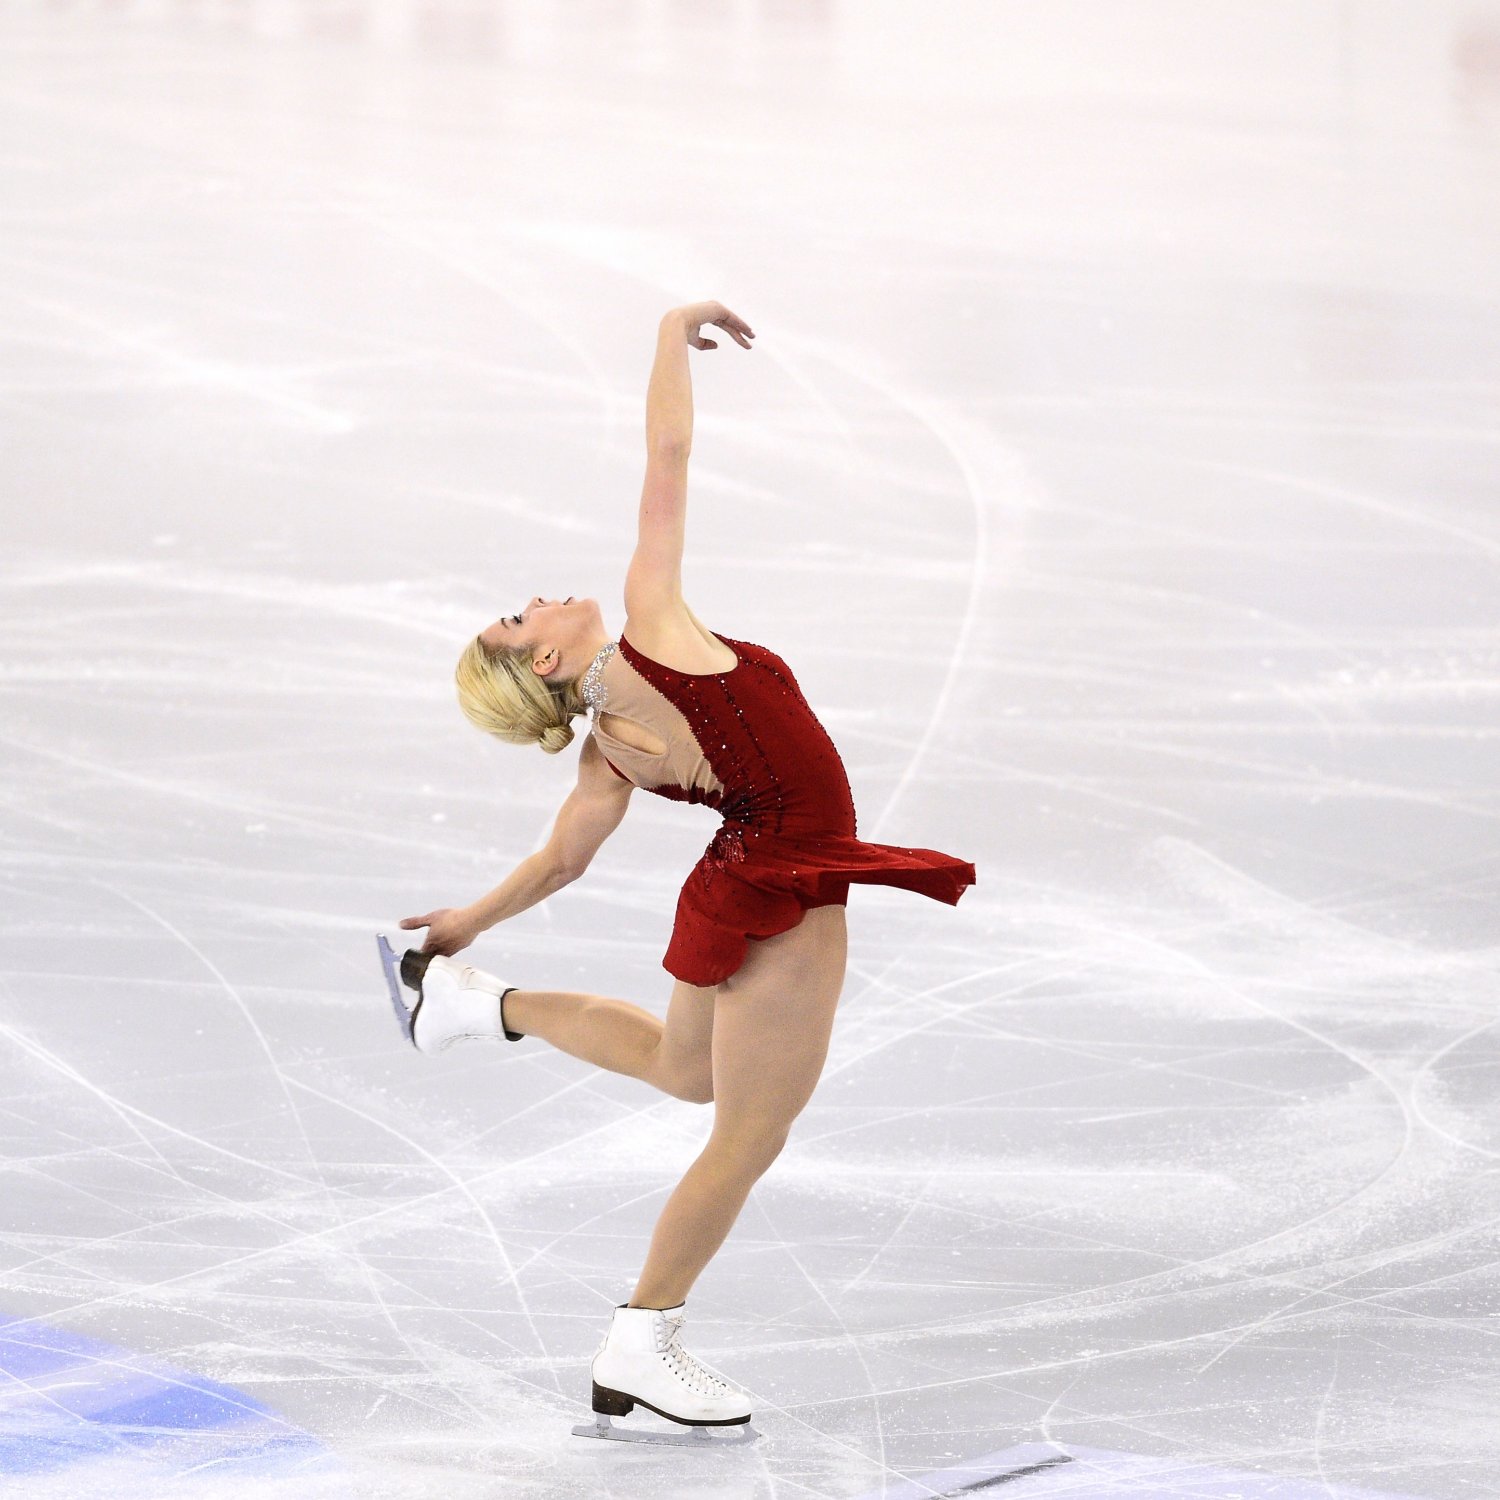 US Figure Skating Championships 2016: TV Schedule, Top Contenders and